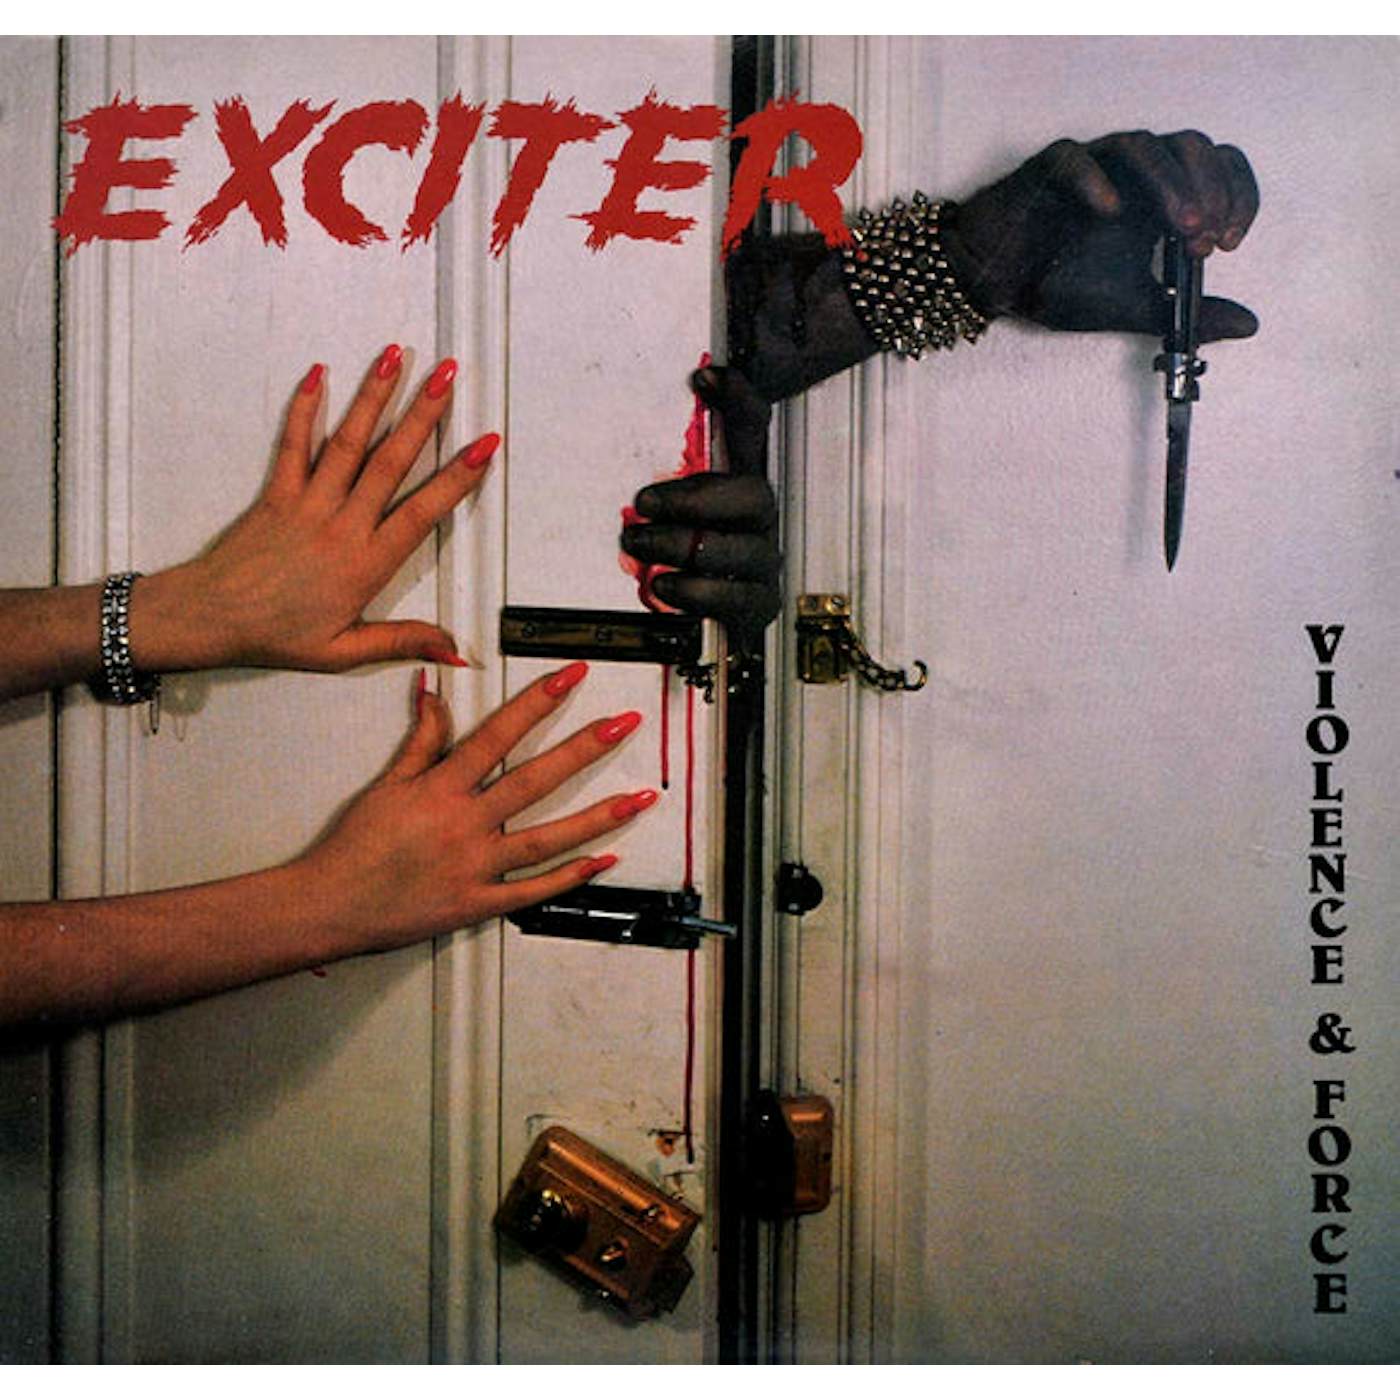 Exciter Violence & Force Vinyl Record